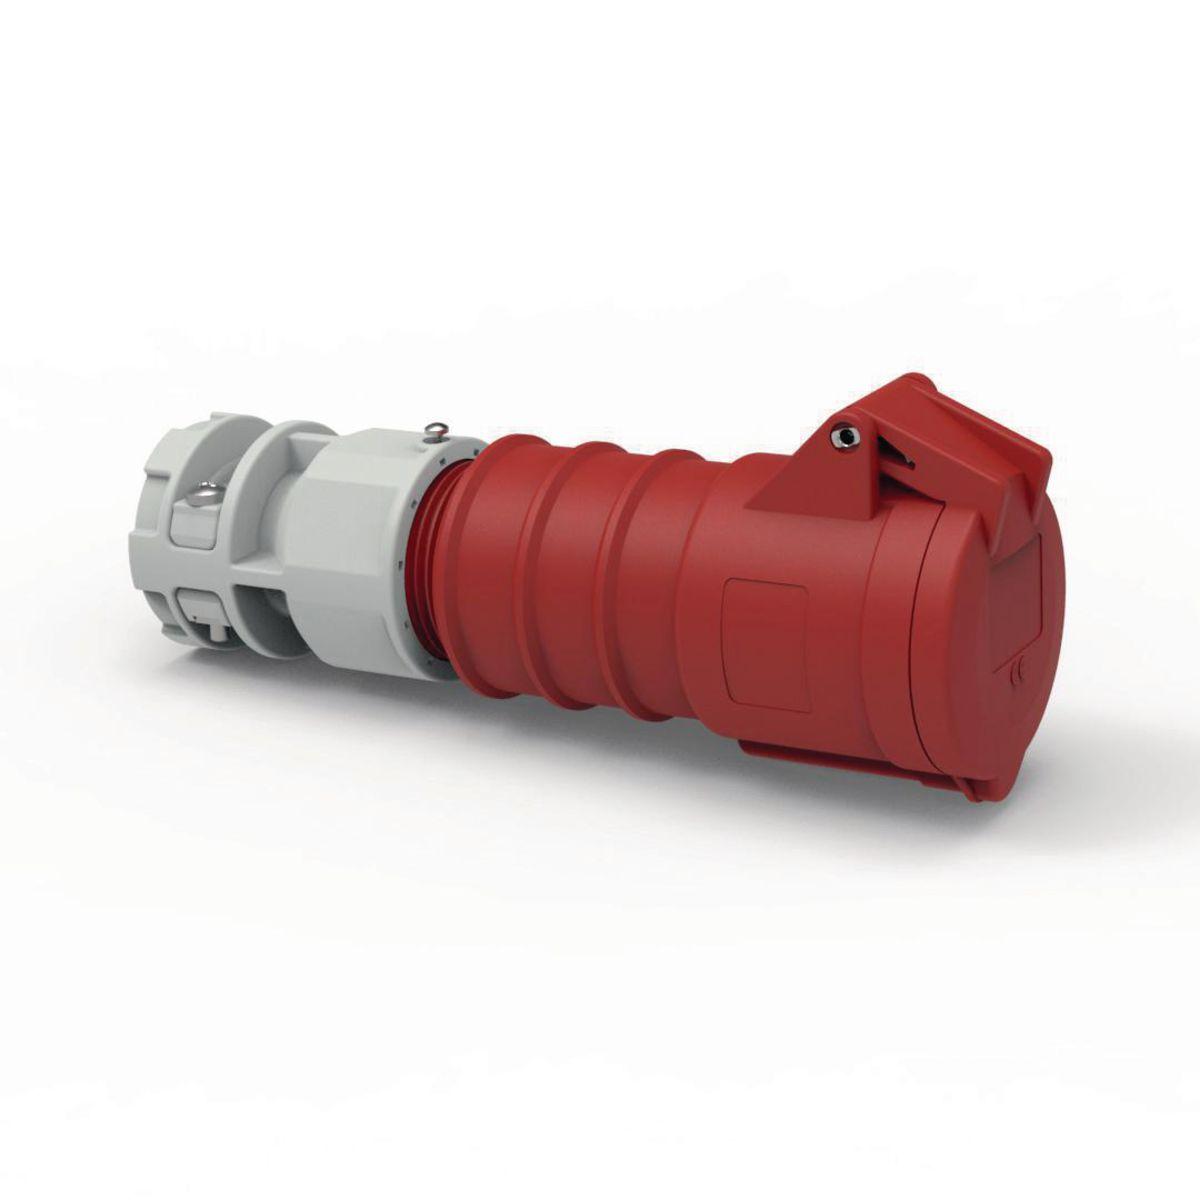 Hubbell C563C6SA Heavy Duty Products, IEC Pin and Sleeve Devices, Hubbell-PRO, Female, Connector Body, 63 A  200-415 VAC, 4-POLE 5-WIRE, Red, Splash Proof  ; IP44 environmental ratings ; Impact and corrosion resistant insulated non-metallic housing ; Sequential contact en